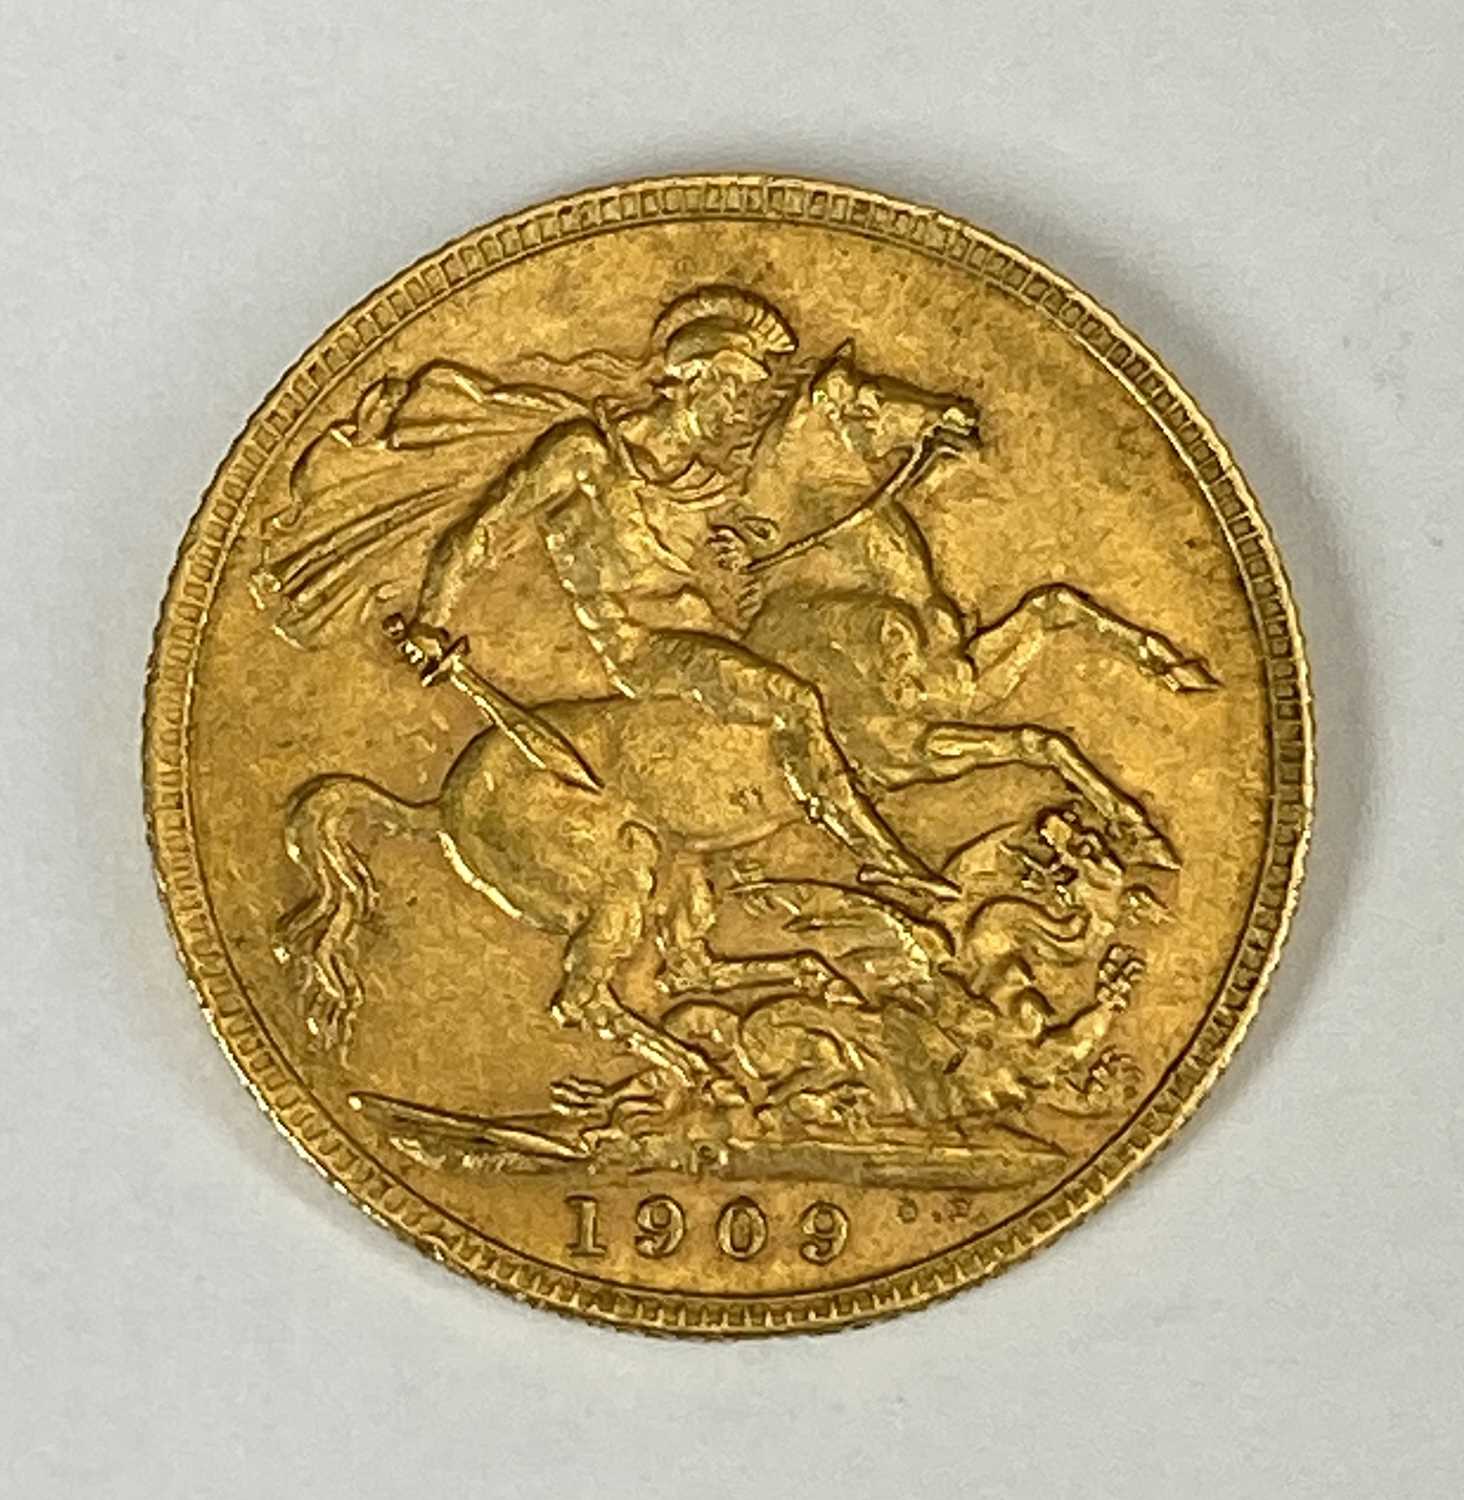 EDWARD VII GOLD FULL SOVEREIGN, 1909, 8g Provenance: private collection Gwynedd